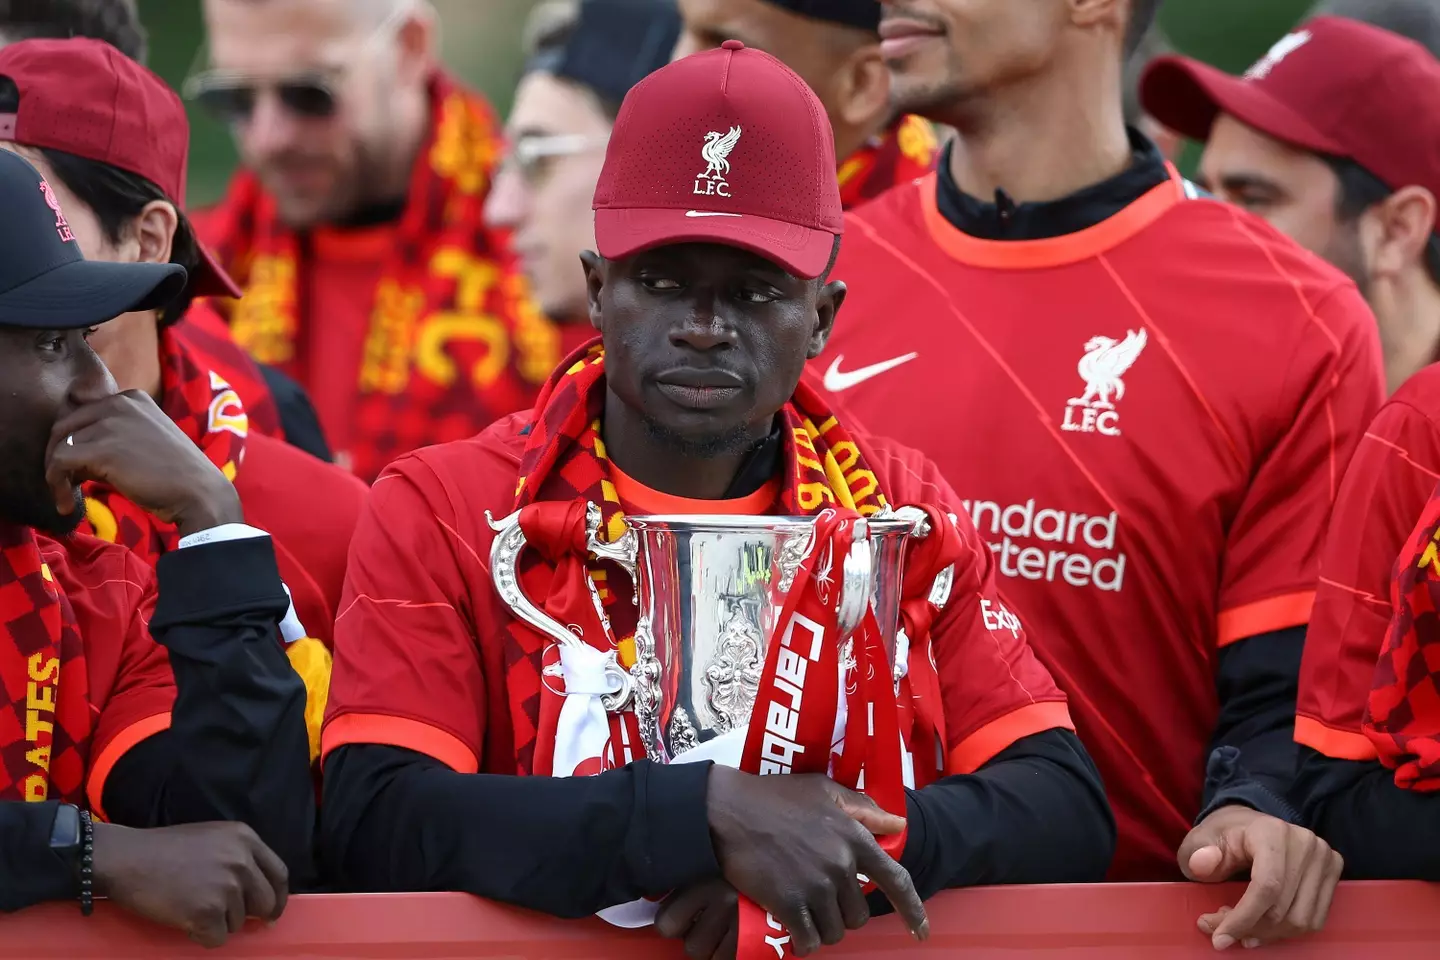 Mane has been with Liverpool since 2016 (Image: PA)